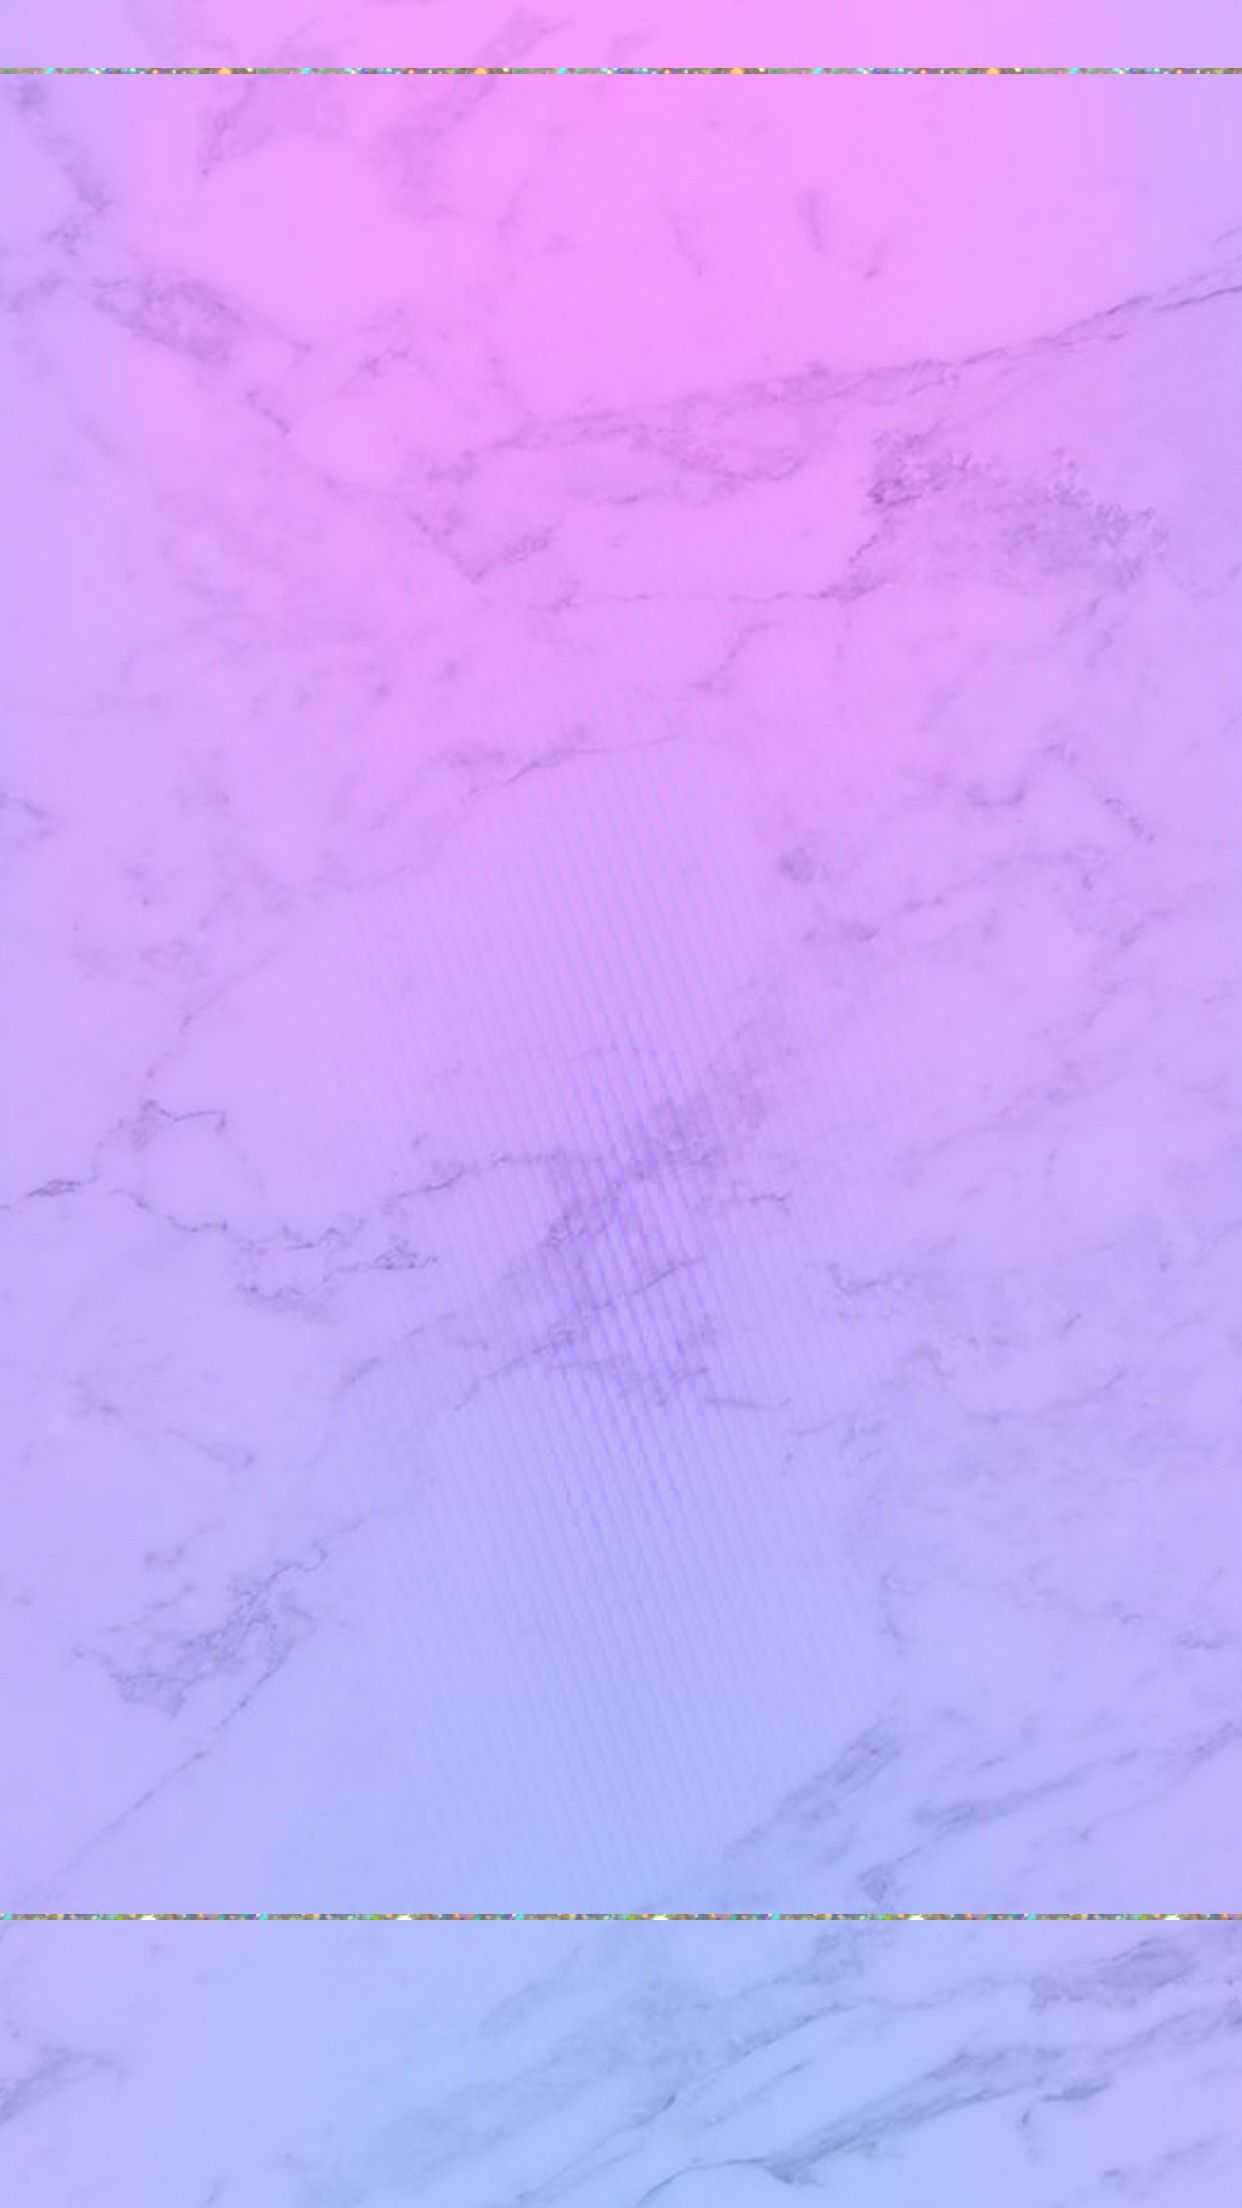 Aesthetic Marble iPhone Wallpaper in HD with high-resolution 1080x1920 pixel. You can set as wallpaper for Apple iPhone X, XS Max, XR, 8, 7, 6, SE, iPad. Enjoy and share your favorite HD wallpapers and background images - Pastel purple